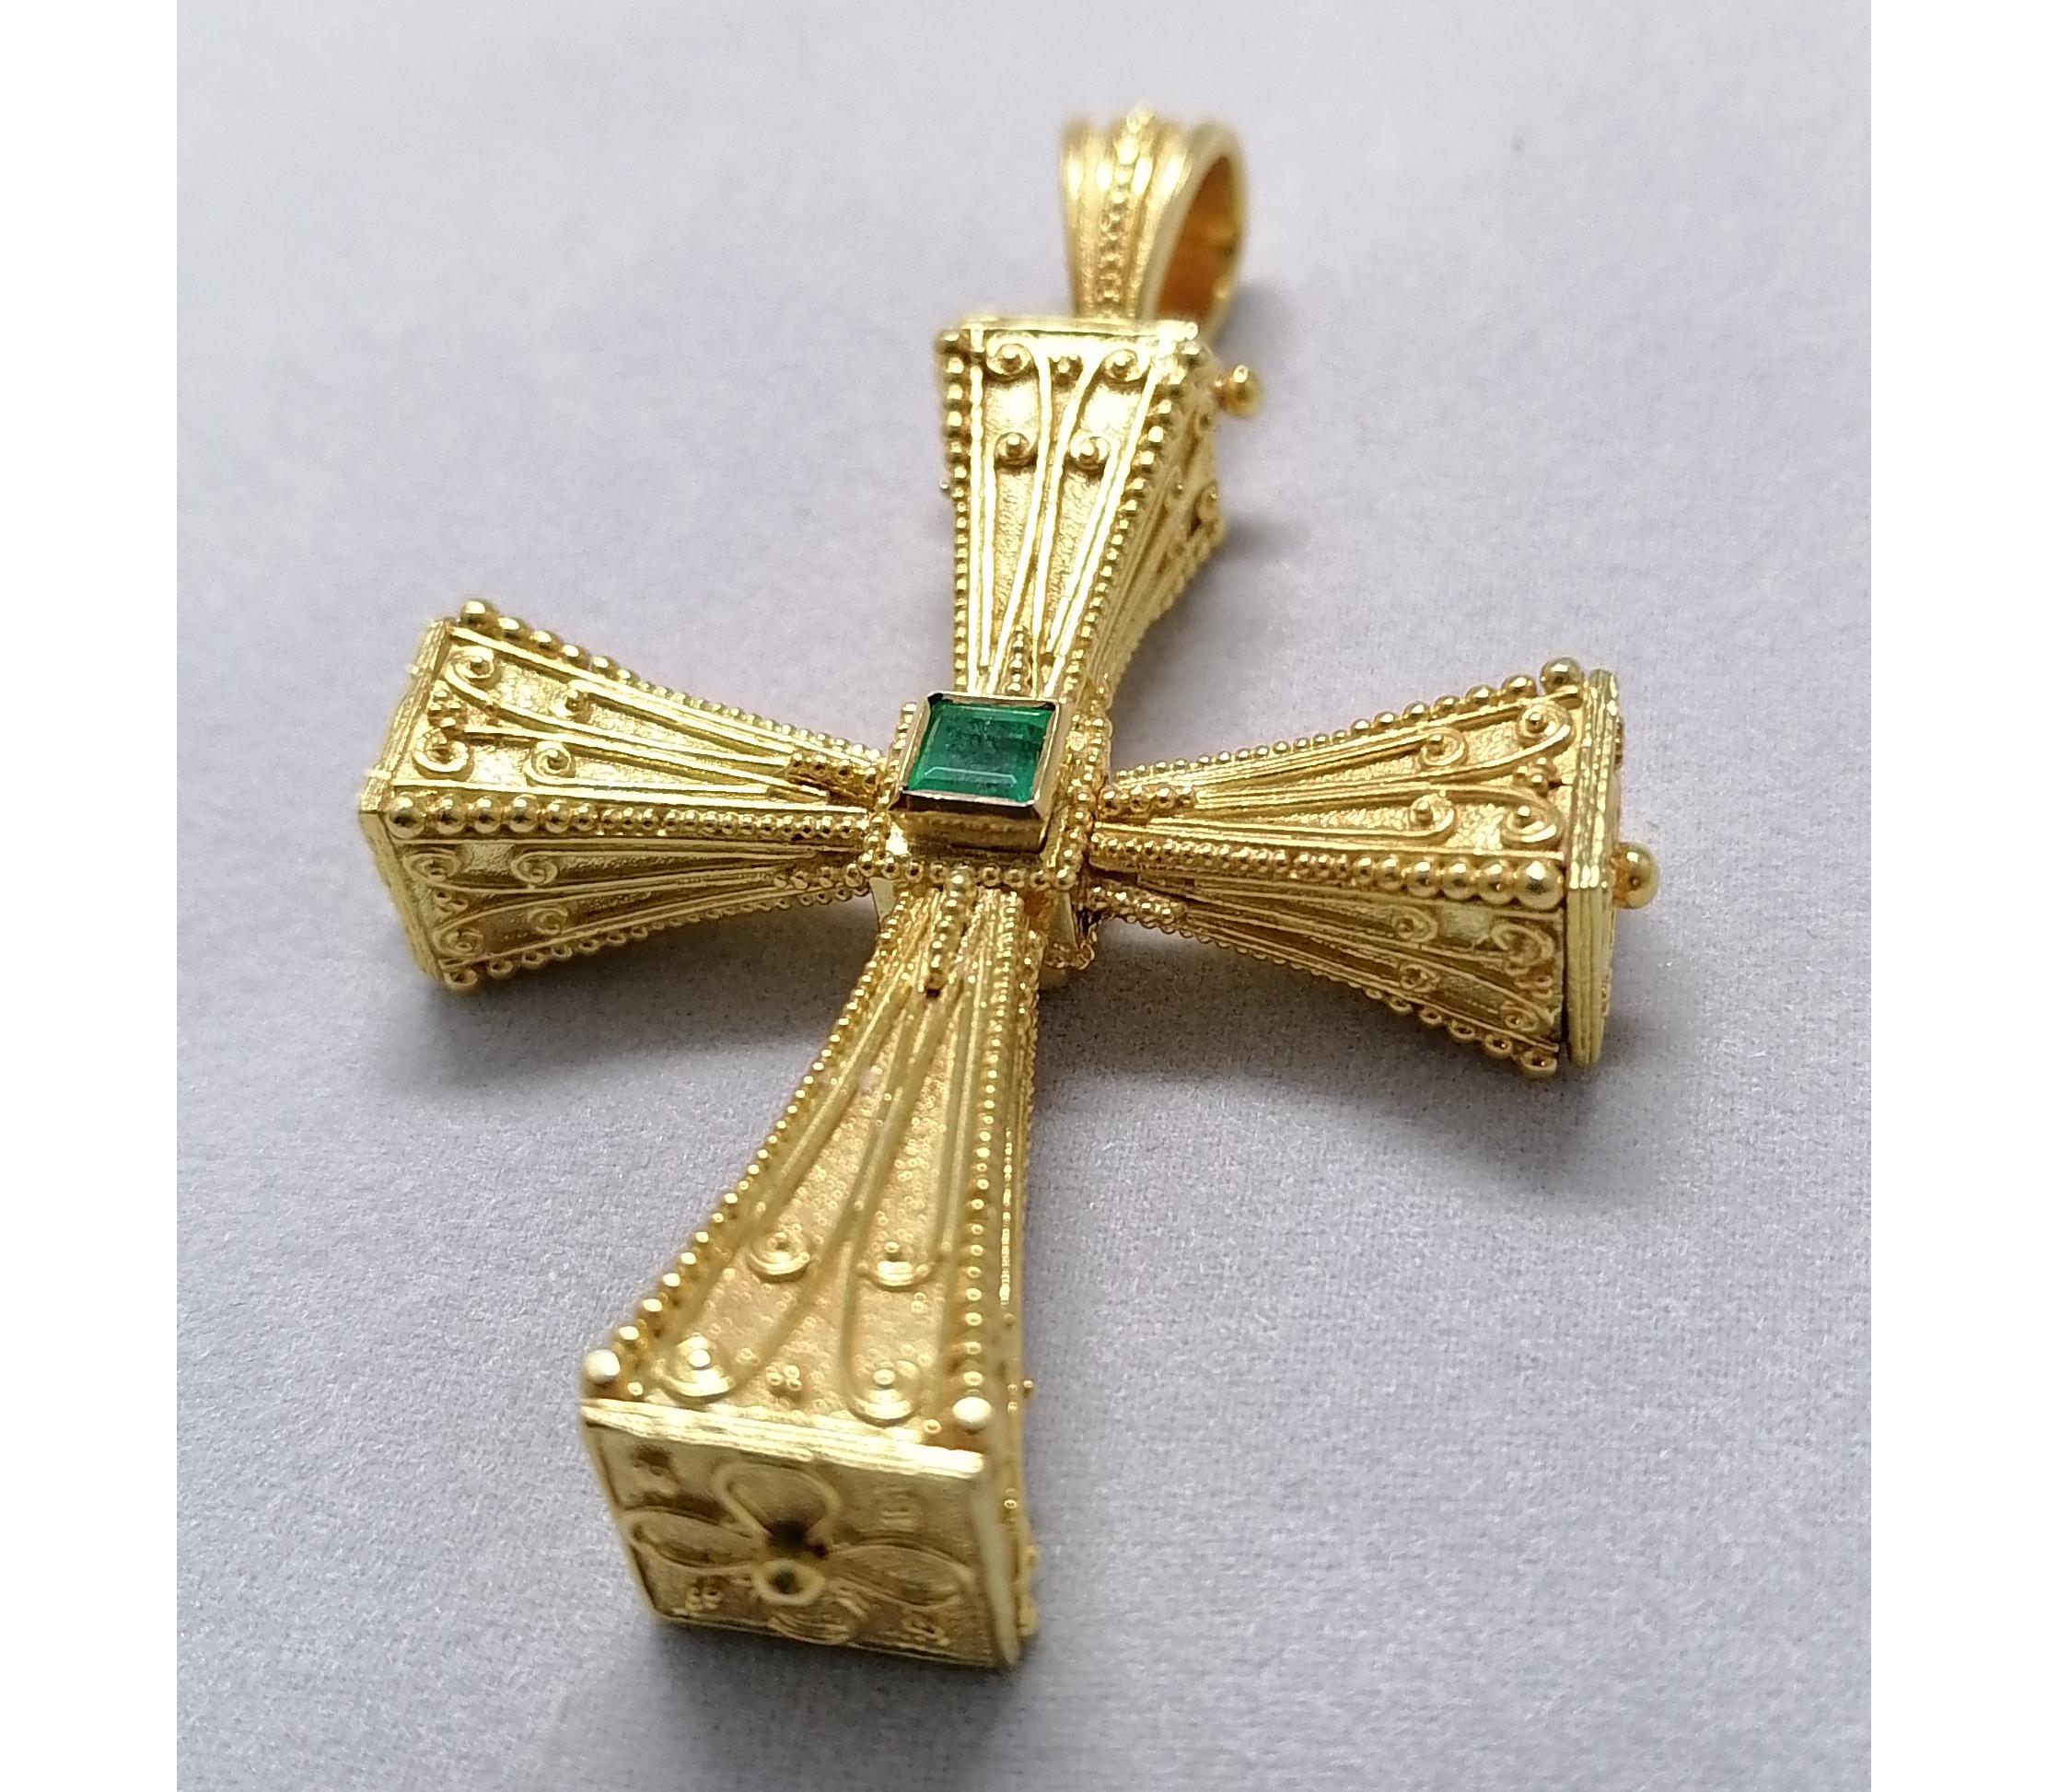 This S.Georgios solid 18 Karat Yellow Gold geometric reversible Cross pendant is beautifully handmade with microscopically decorated Byzantine-style granulation work and finished with a unique velvet background and a 3-dimensional look. This